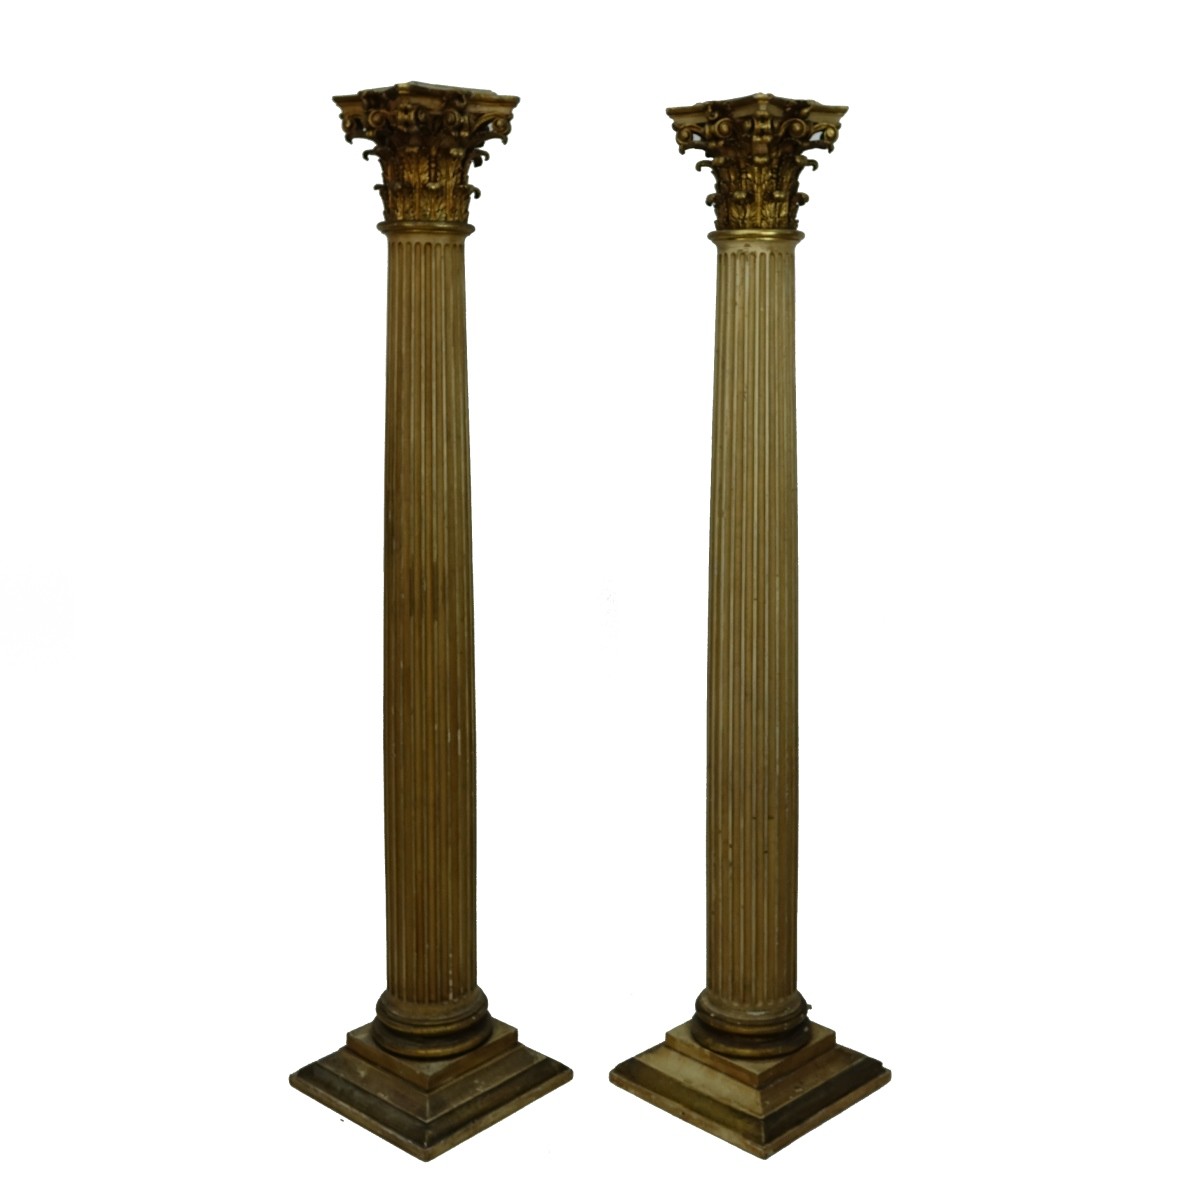 Pair of Large Giltwood Carved Columns